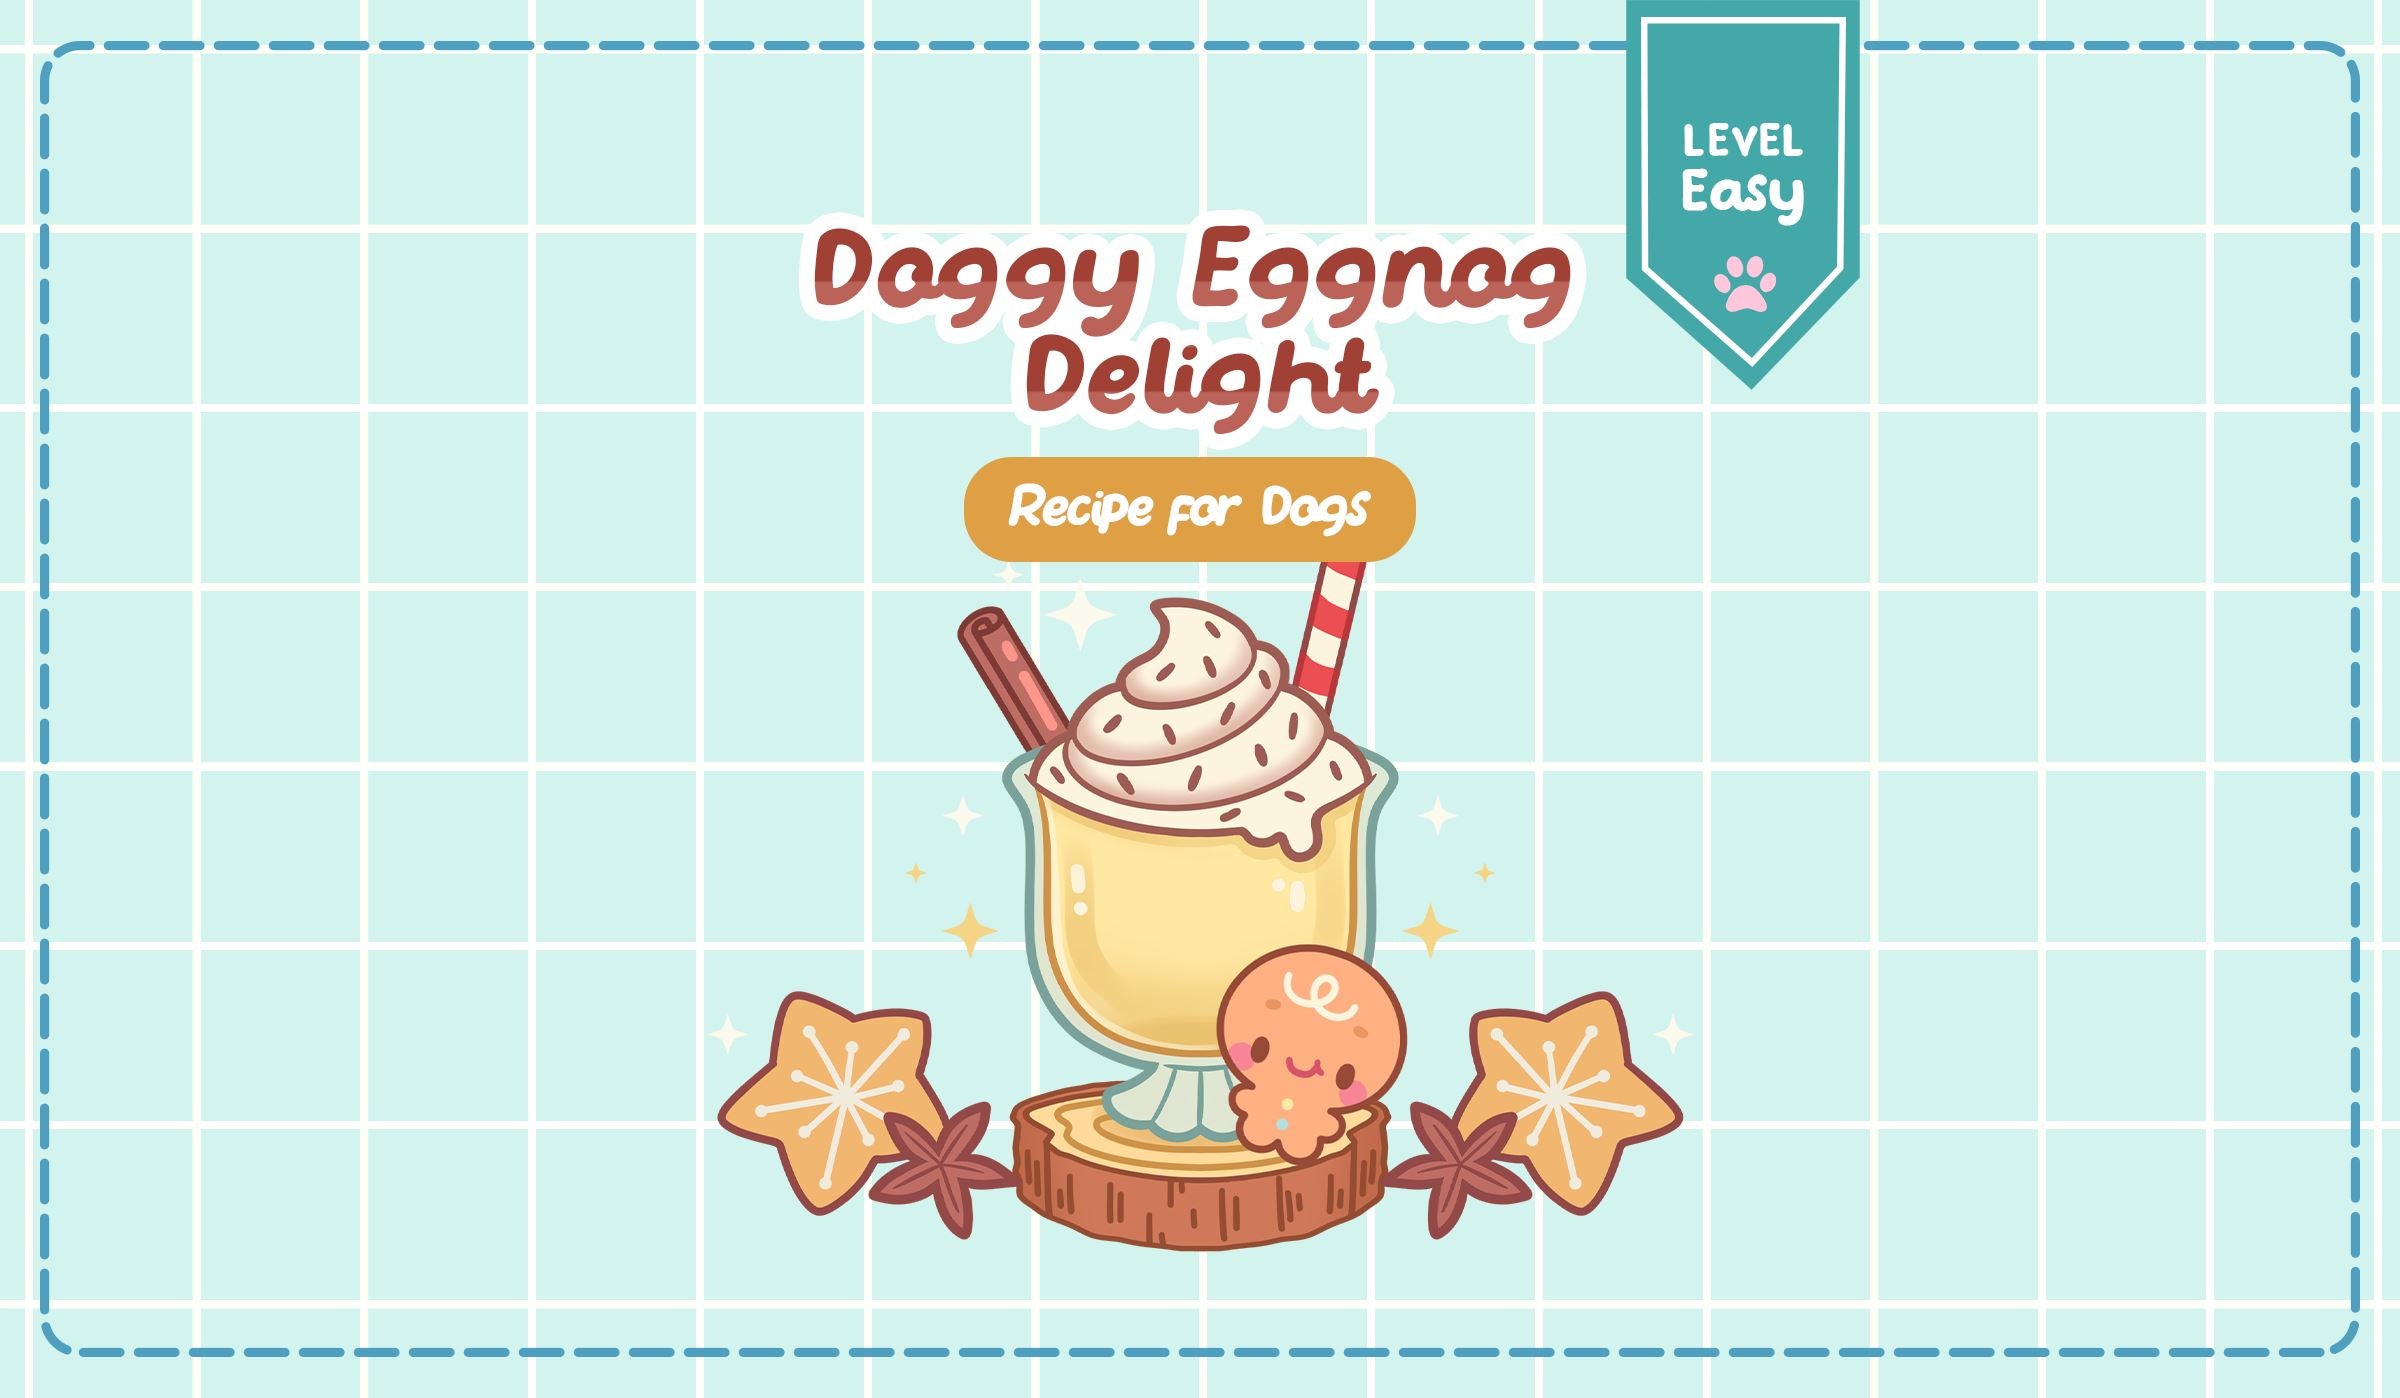 Doggy Eggnog Delight- Pamper Your Dog with this Delicious Recipe!